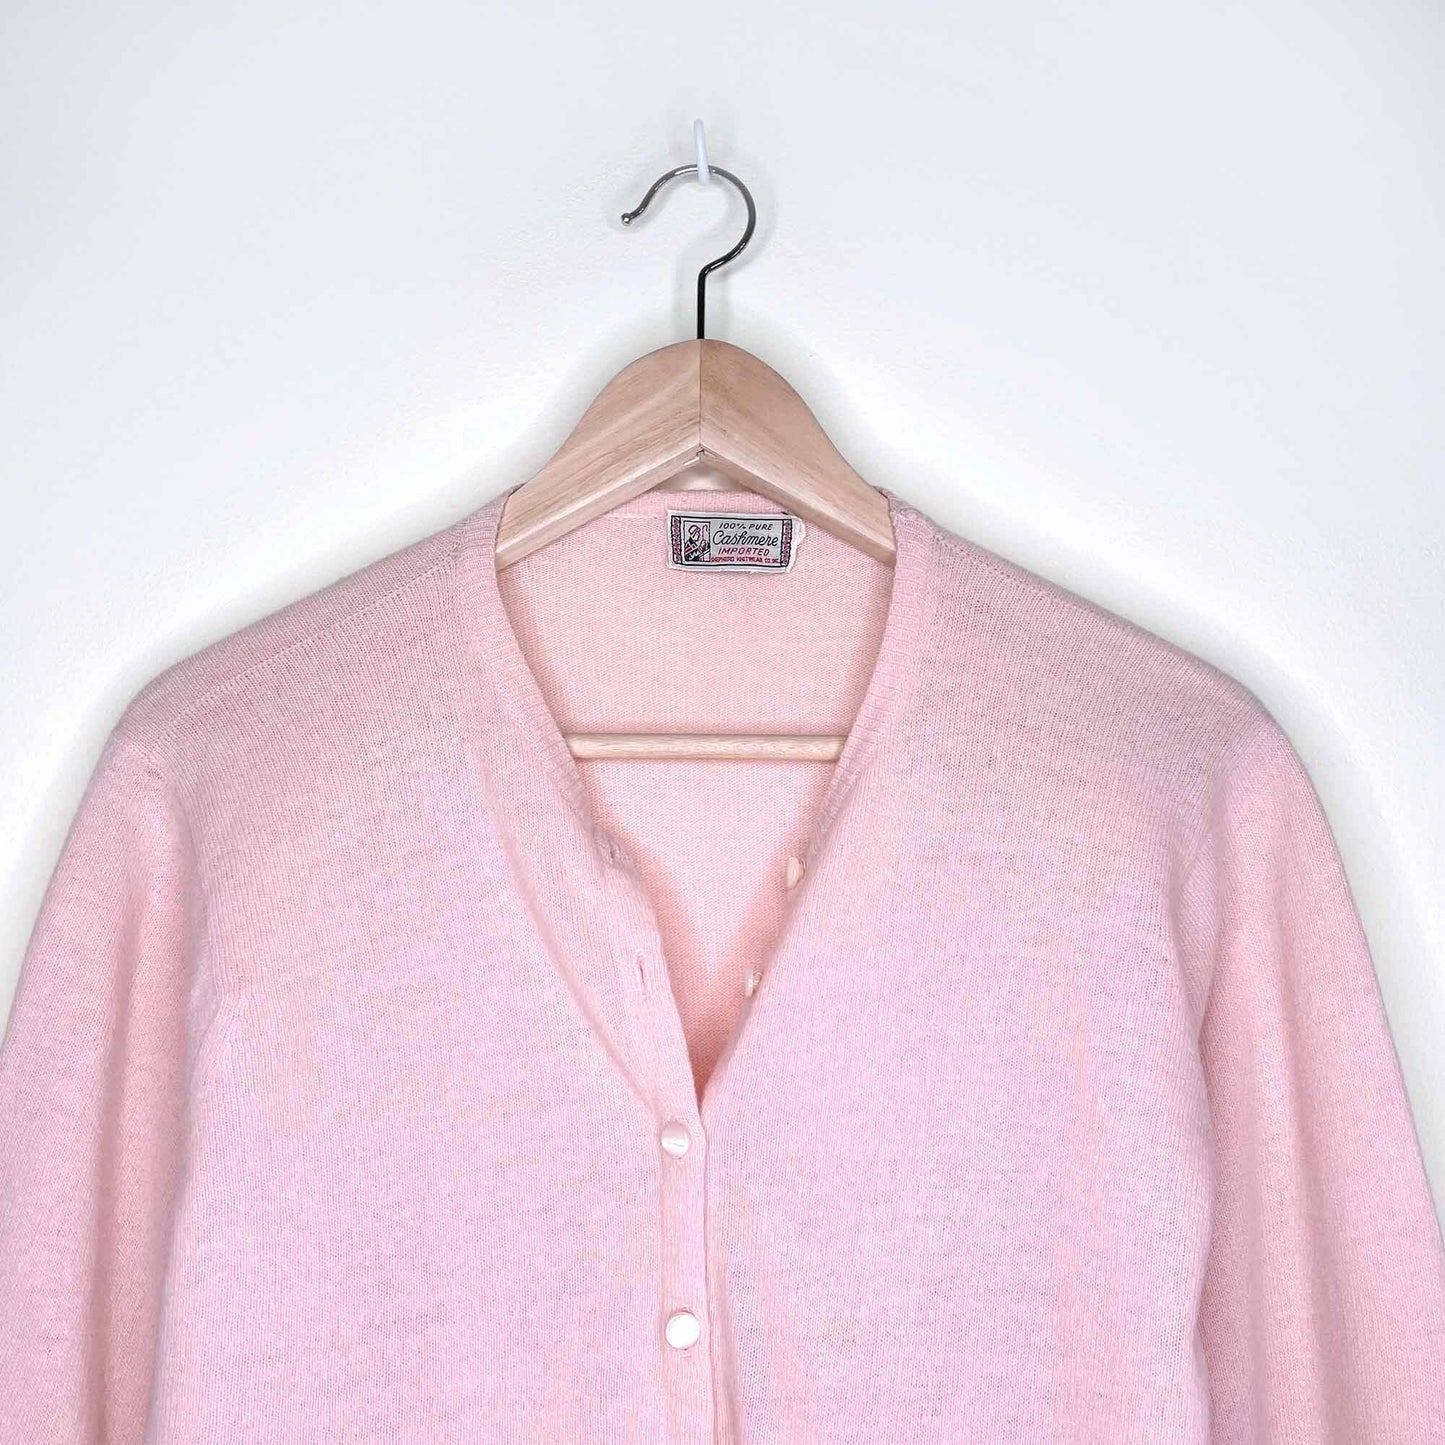 Vintage Shepard Knitwear Co. pink cashmere cardigan - size Small